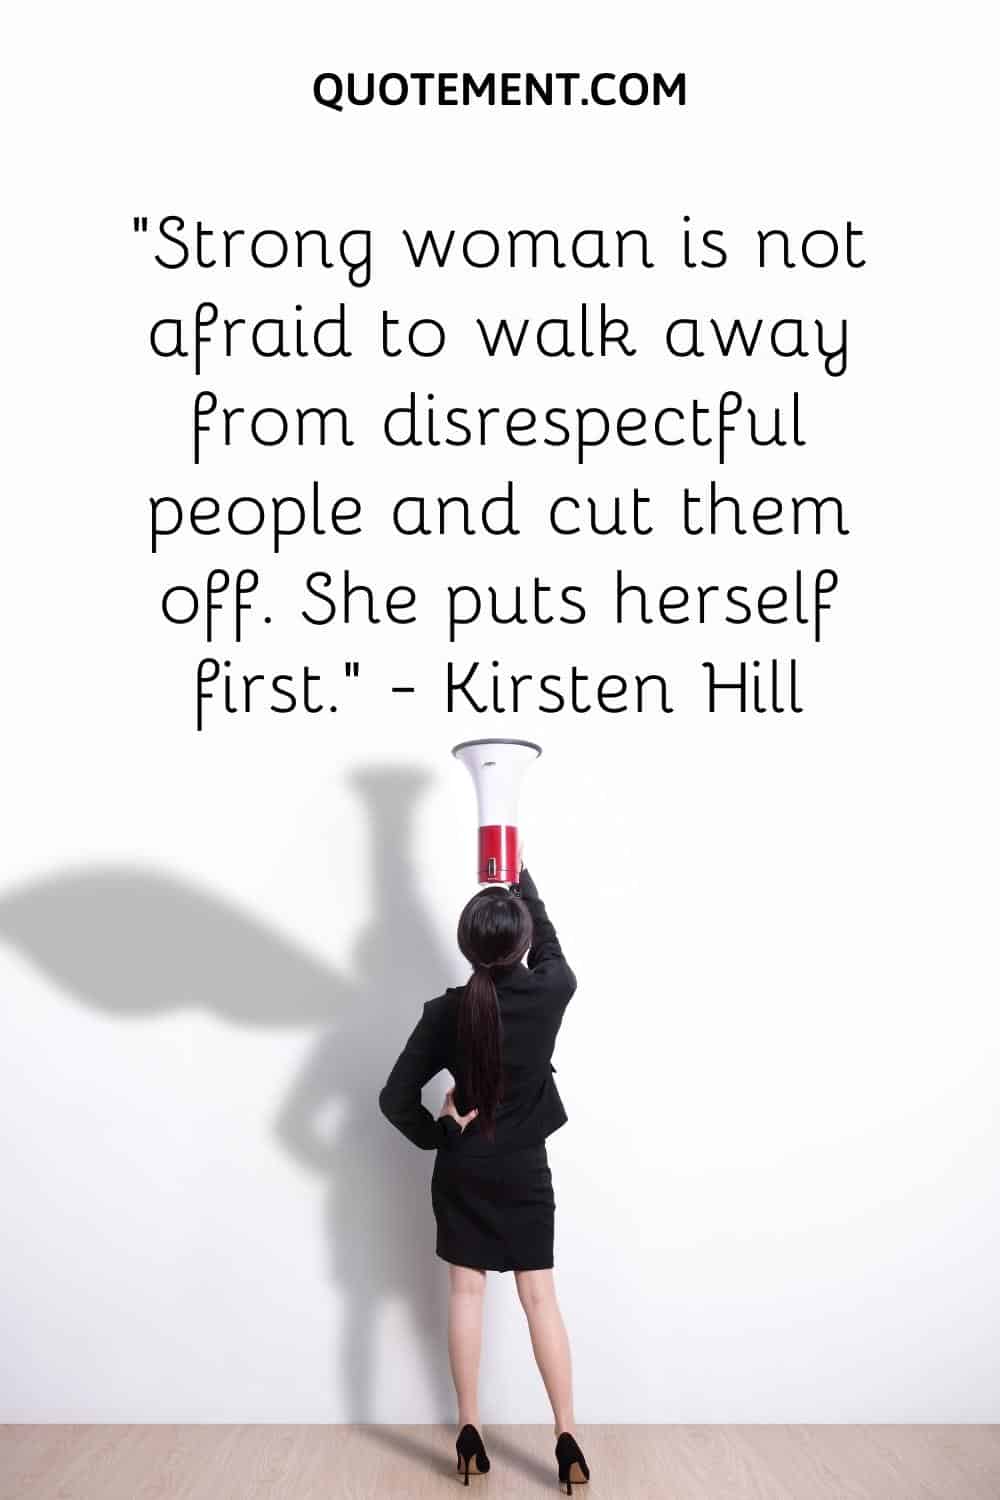 Strong woman is not afraid to walk away from disrespectful people and cut them off